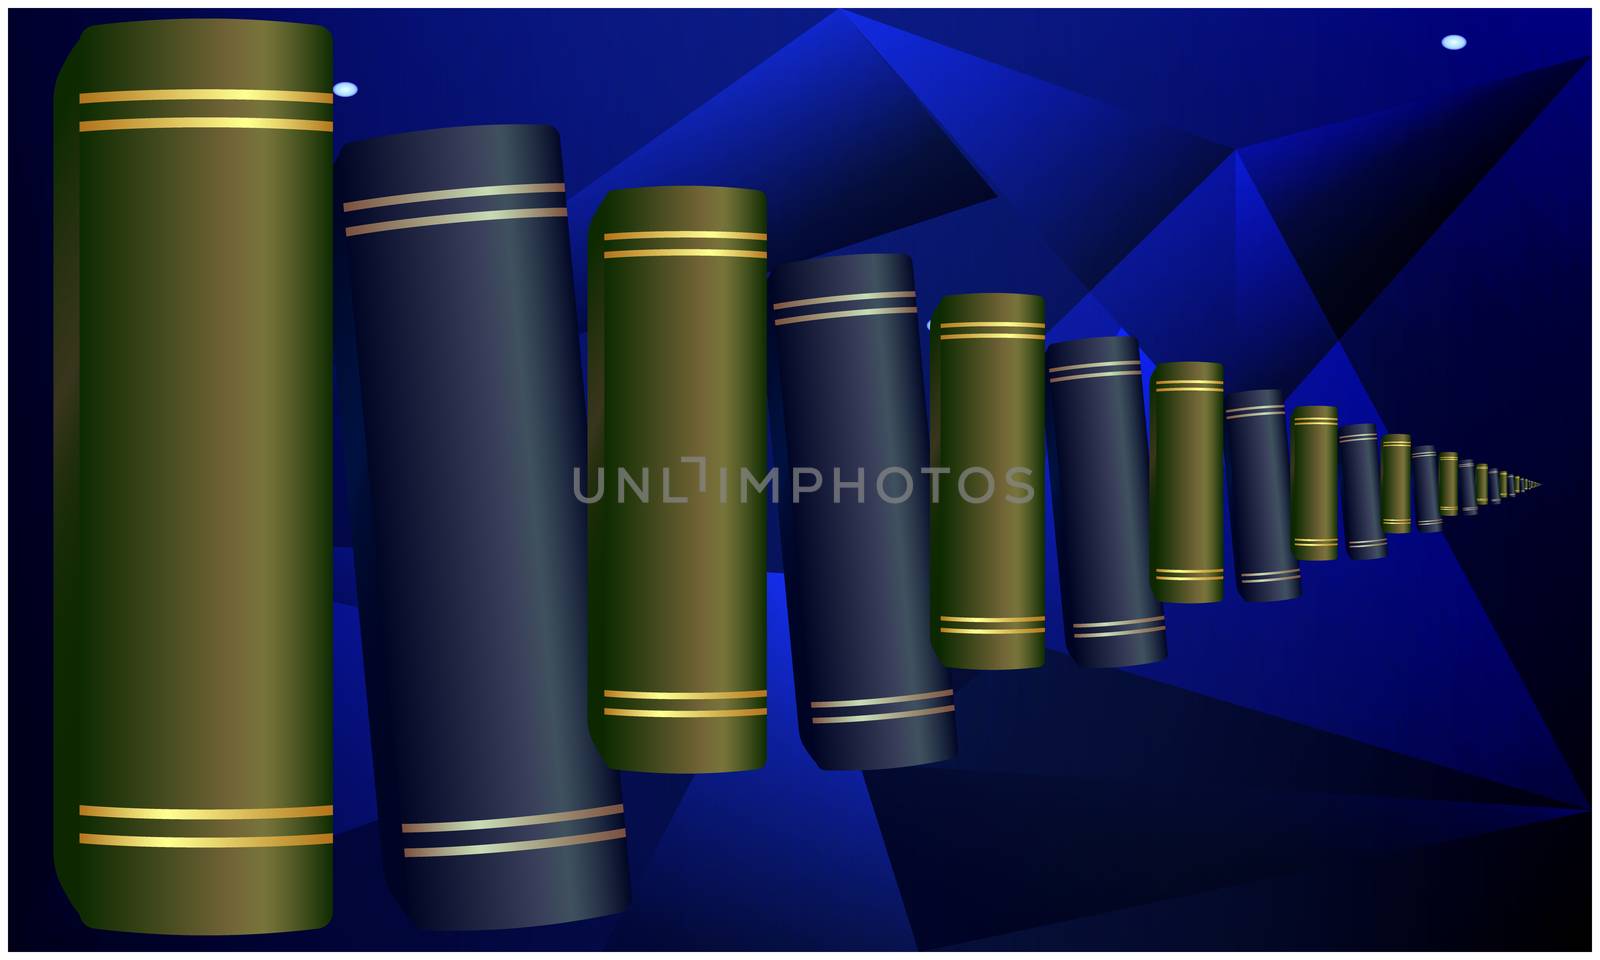 digital textile design of book on abstract background by aanavcreationsplus